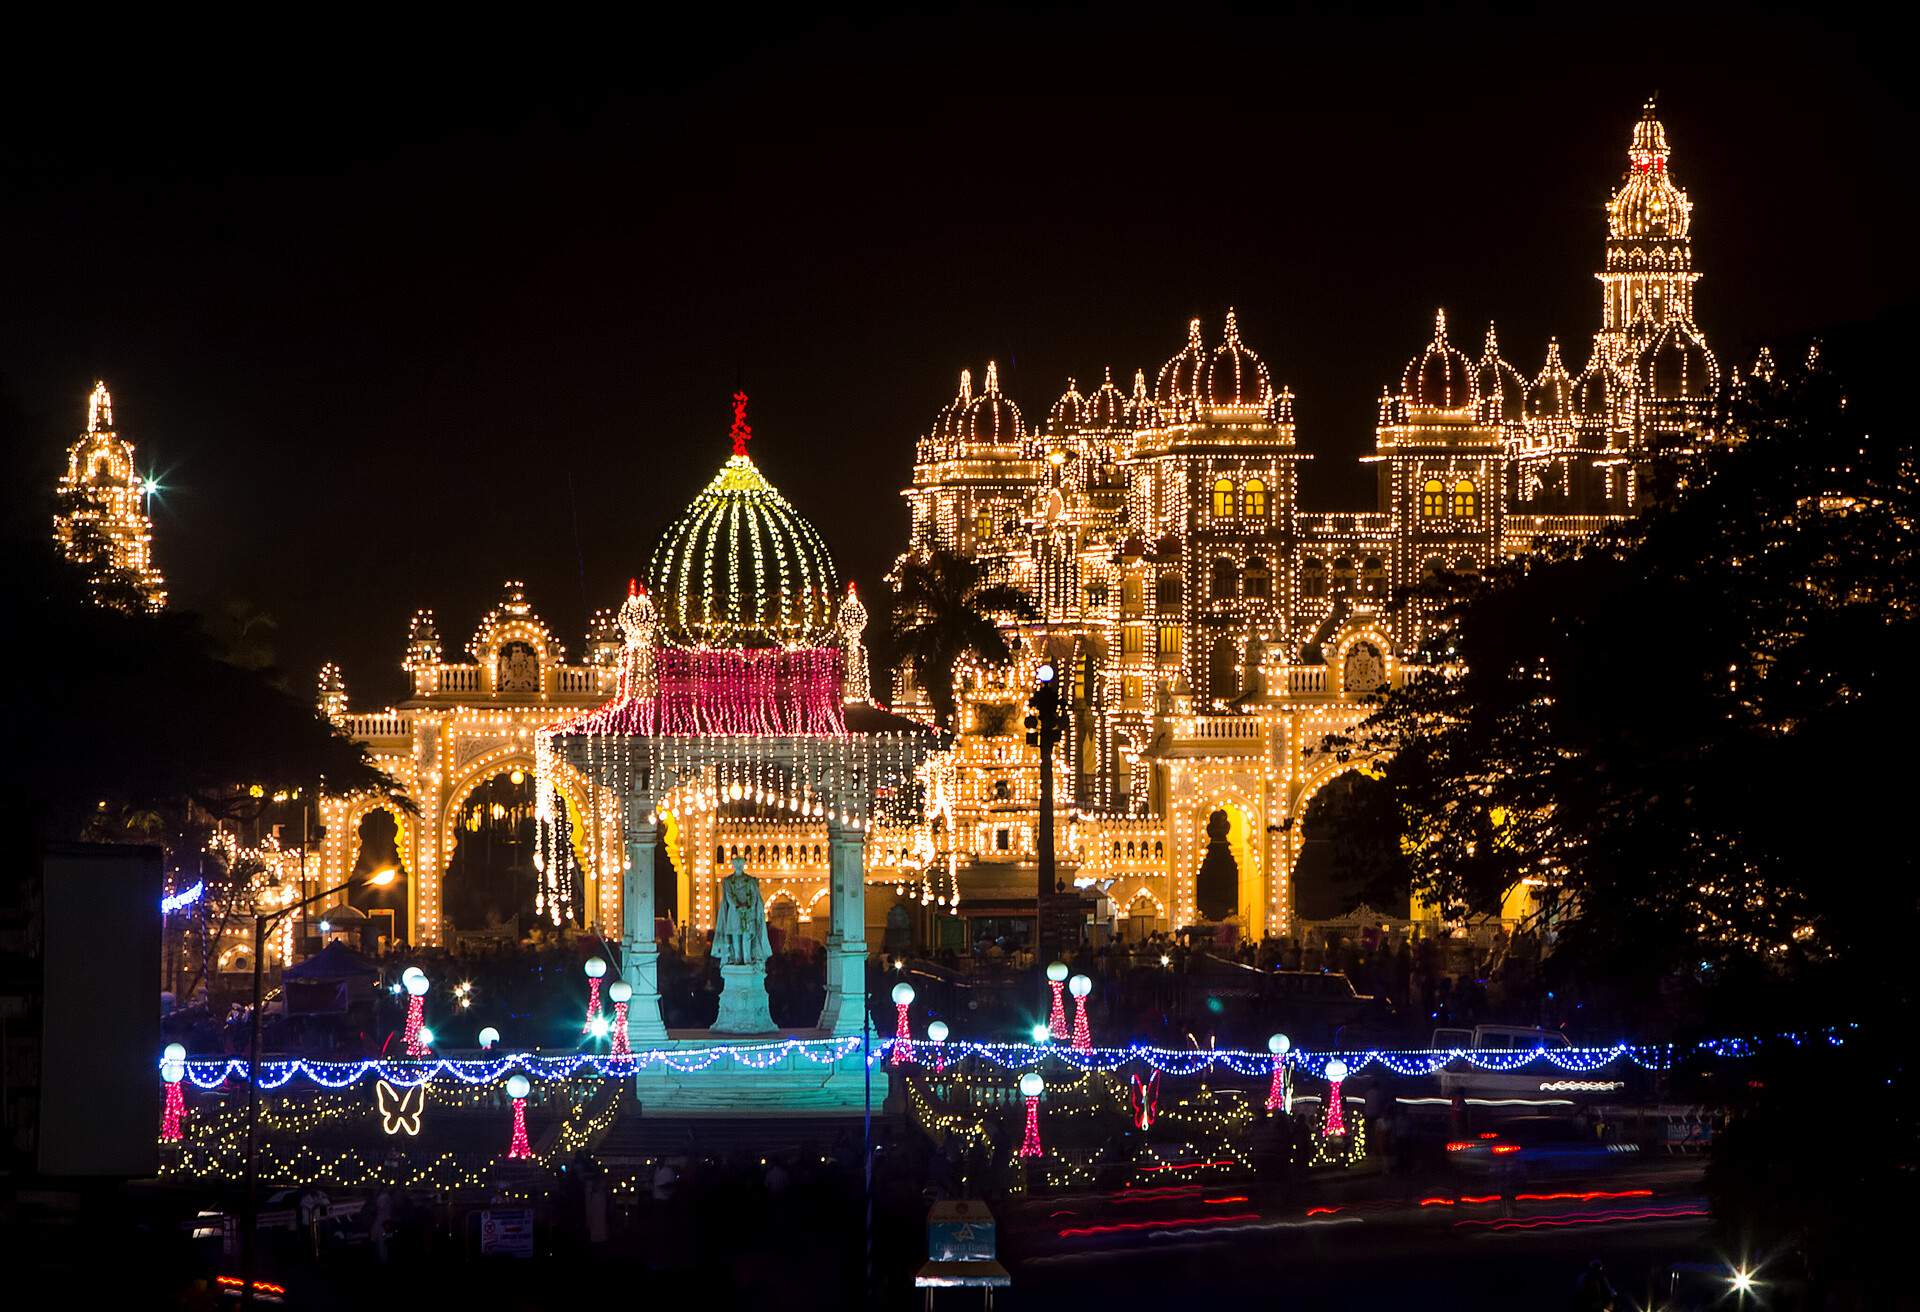 DEST_INDIA_TARNAKATA_MYSORE-PALACE_THEME_Dussehra-Festival_GettyImages-595984024